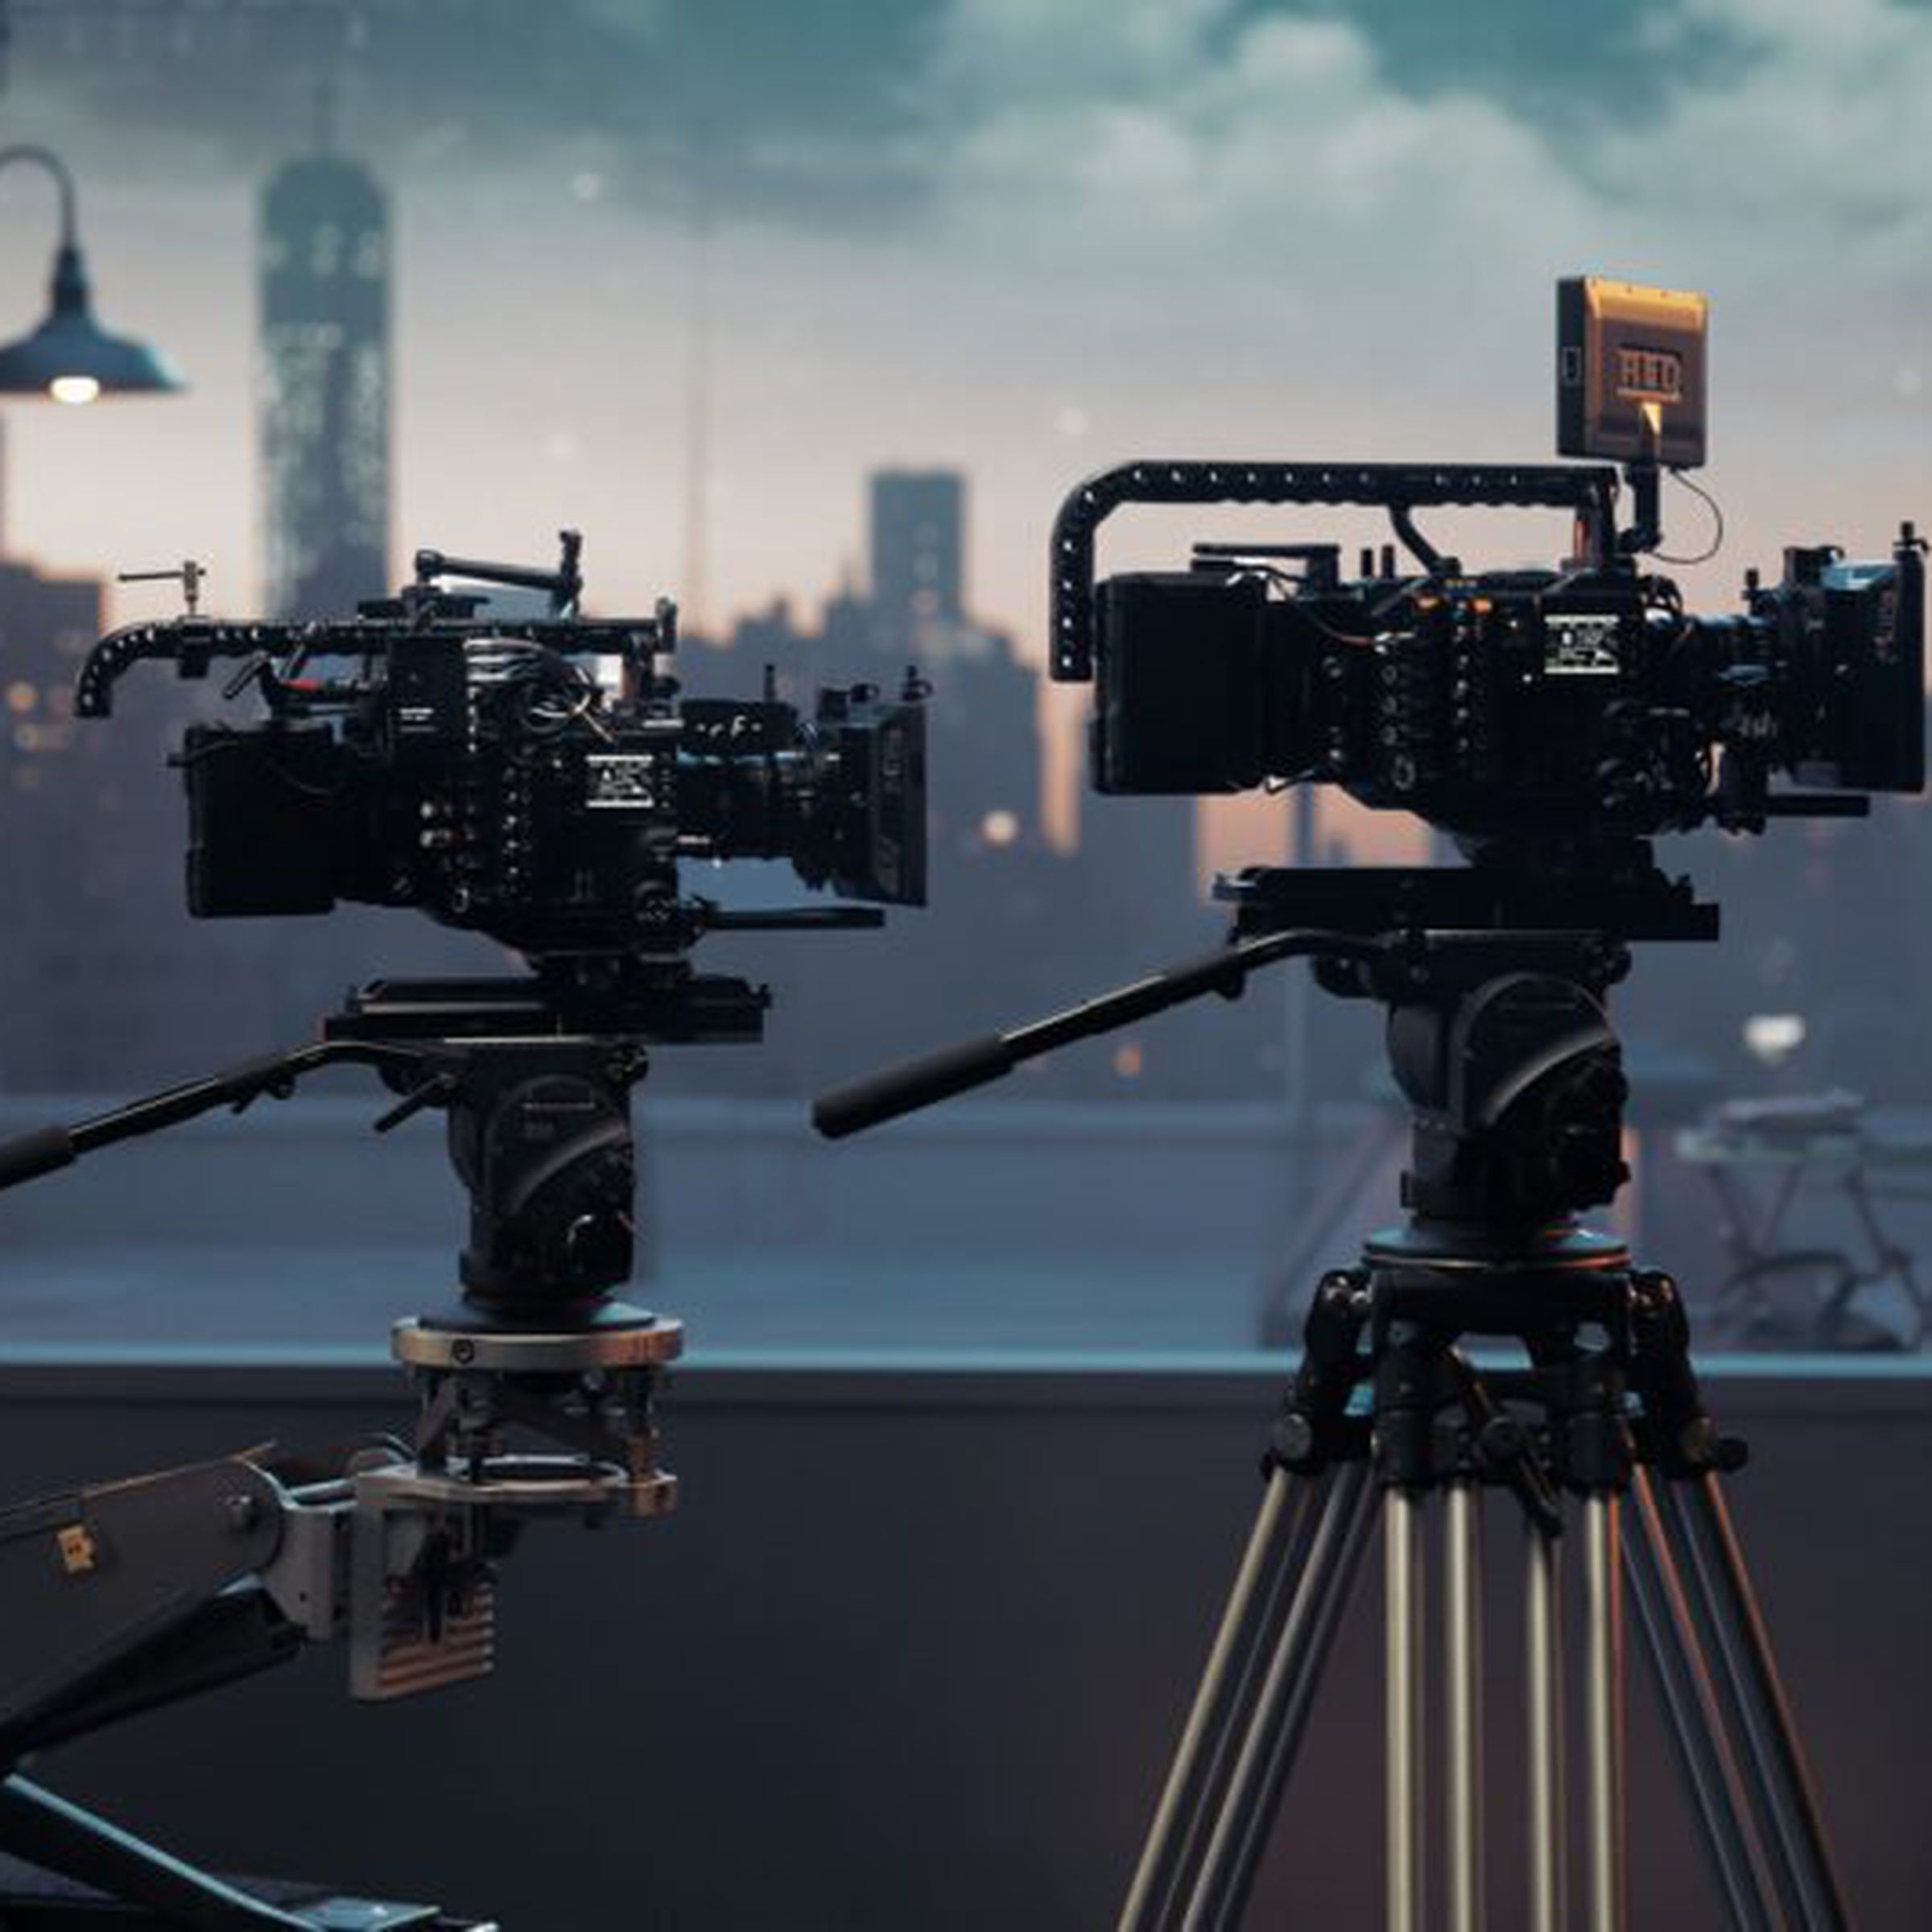 The RED V-Raptor (L) and V-Raptor XL, two cameras that can upload 8K RAW files to the cloud.